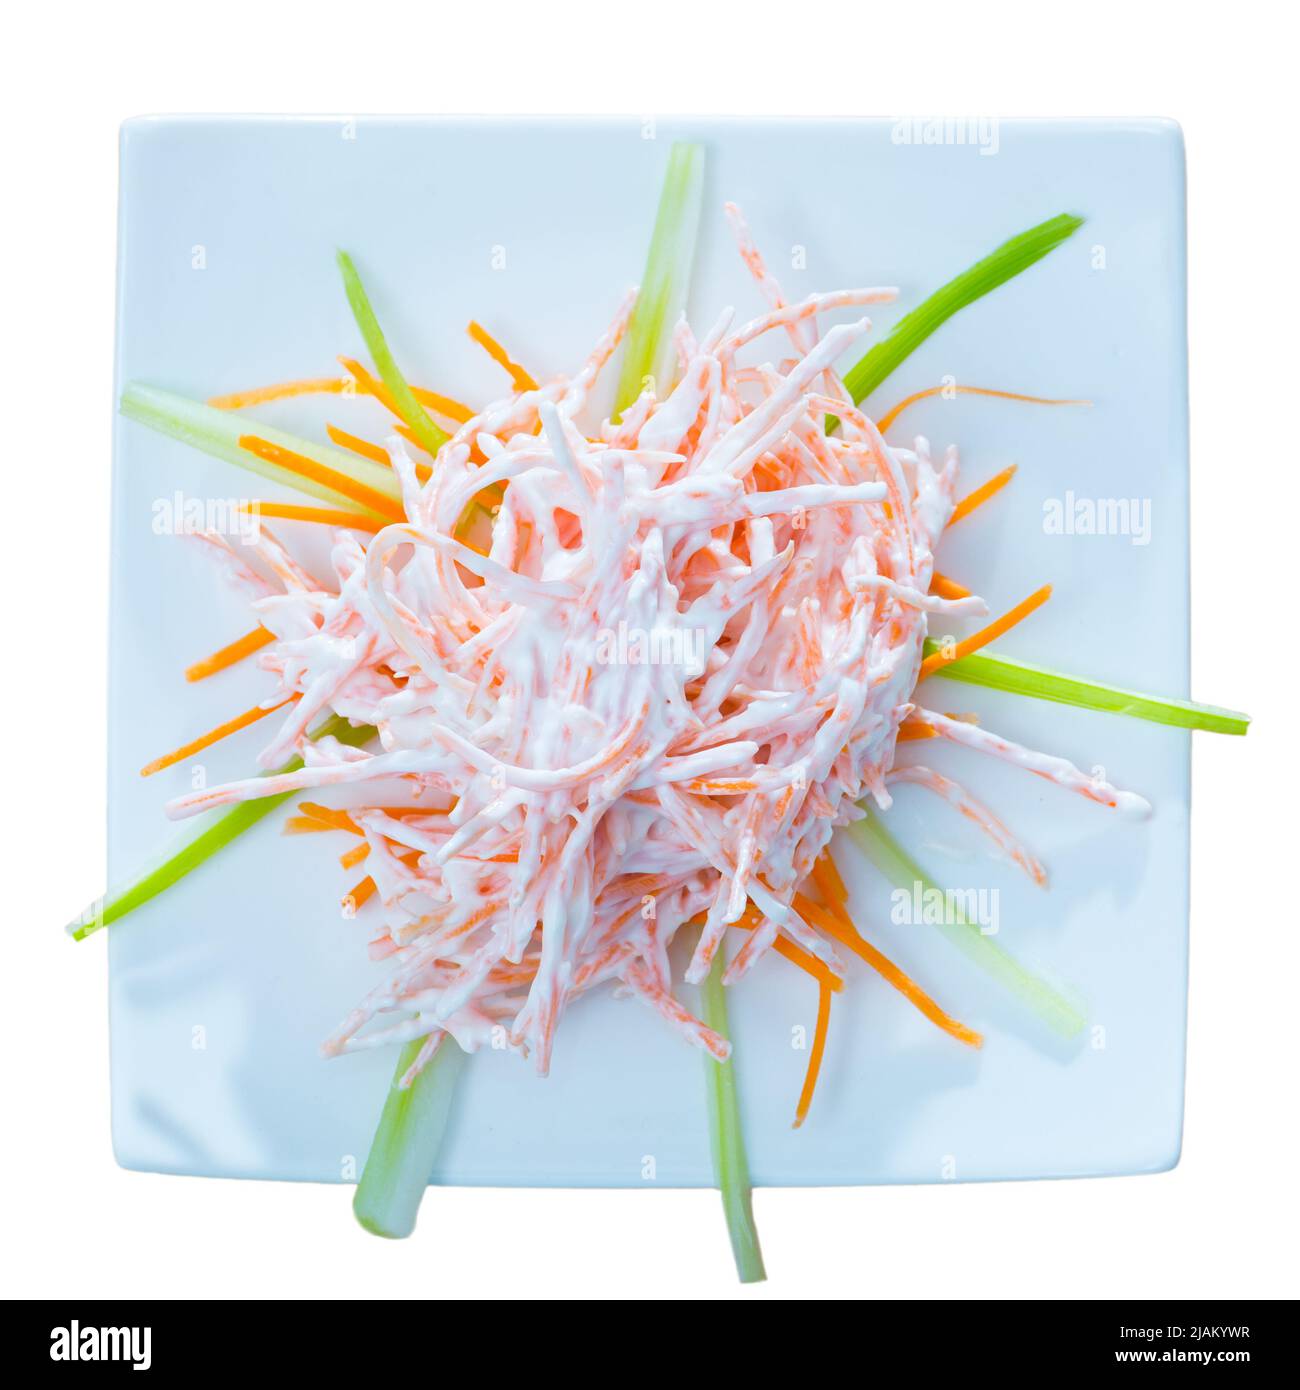 Top view of salad with carrots, garlic and sour cream Stock Photo